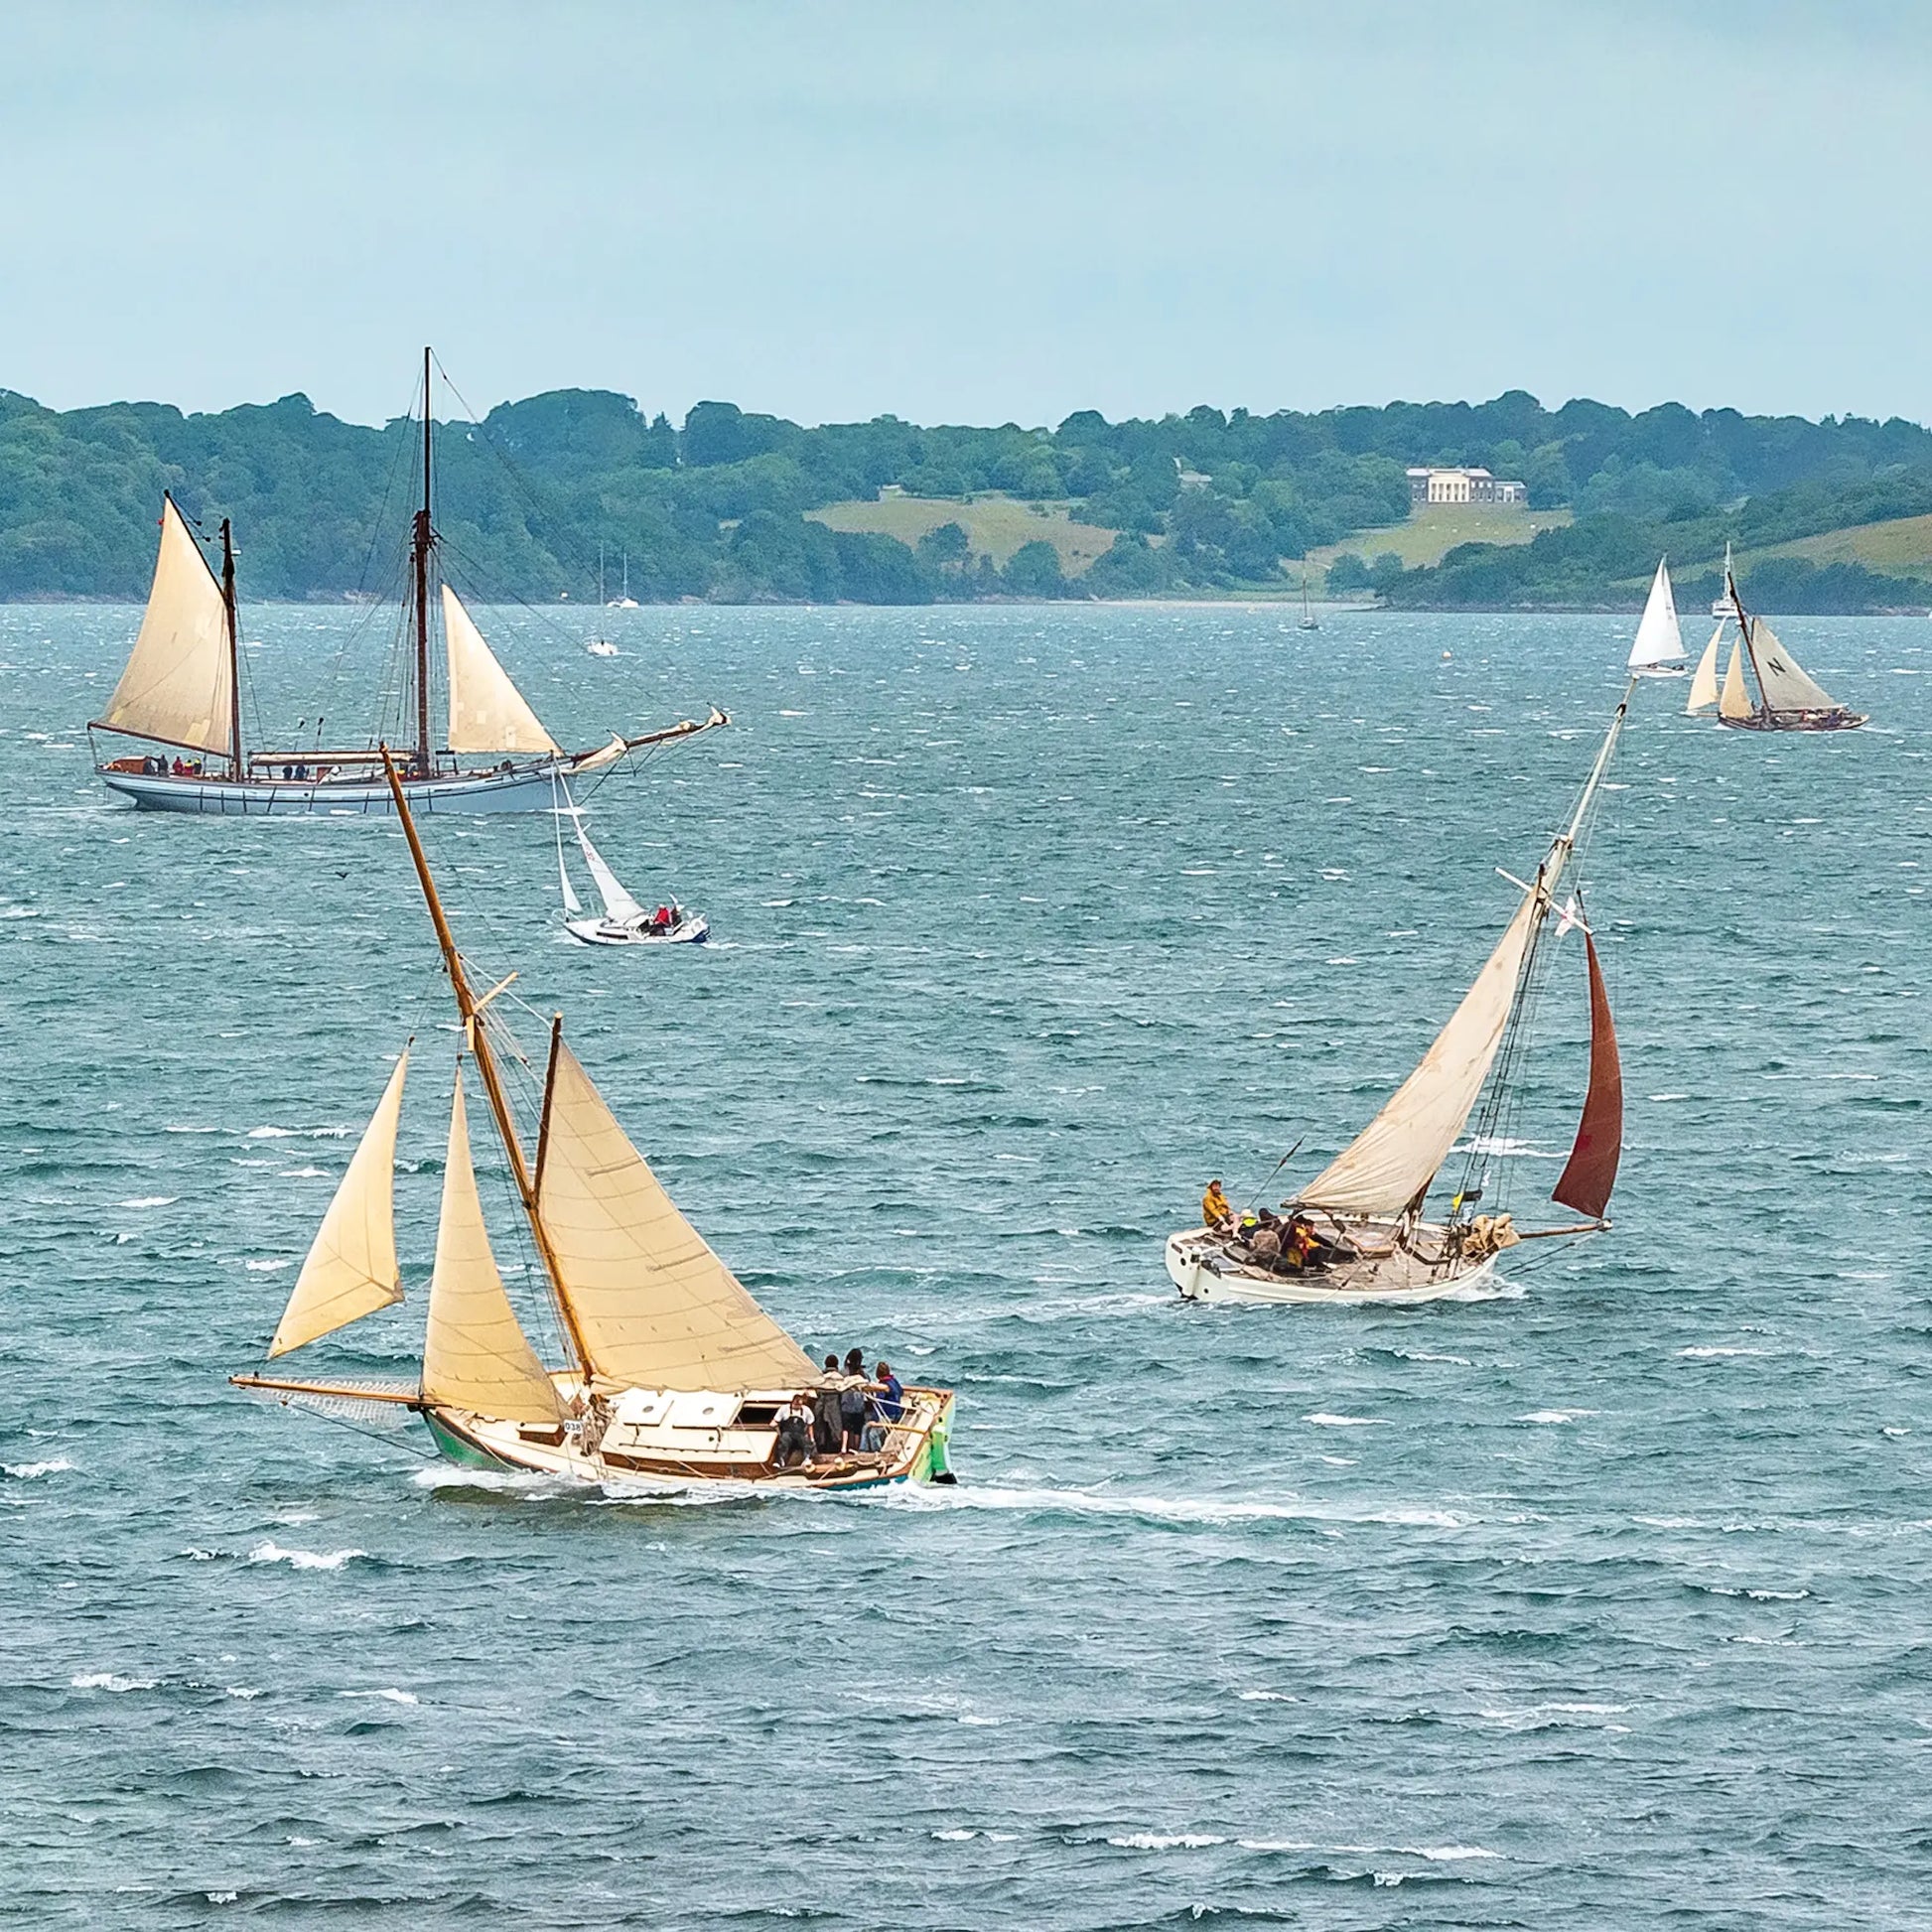 Cornish Greeting Card showing sailing at the Falmouth Classics regatta, in front of Trelissick Gardens